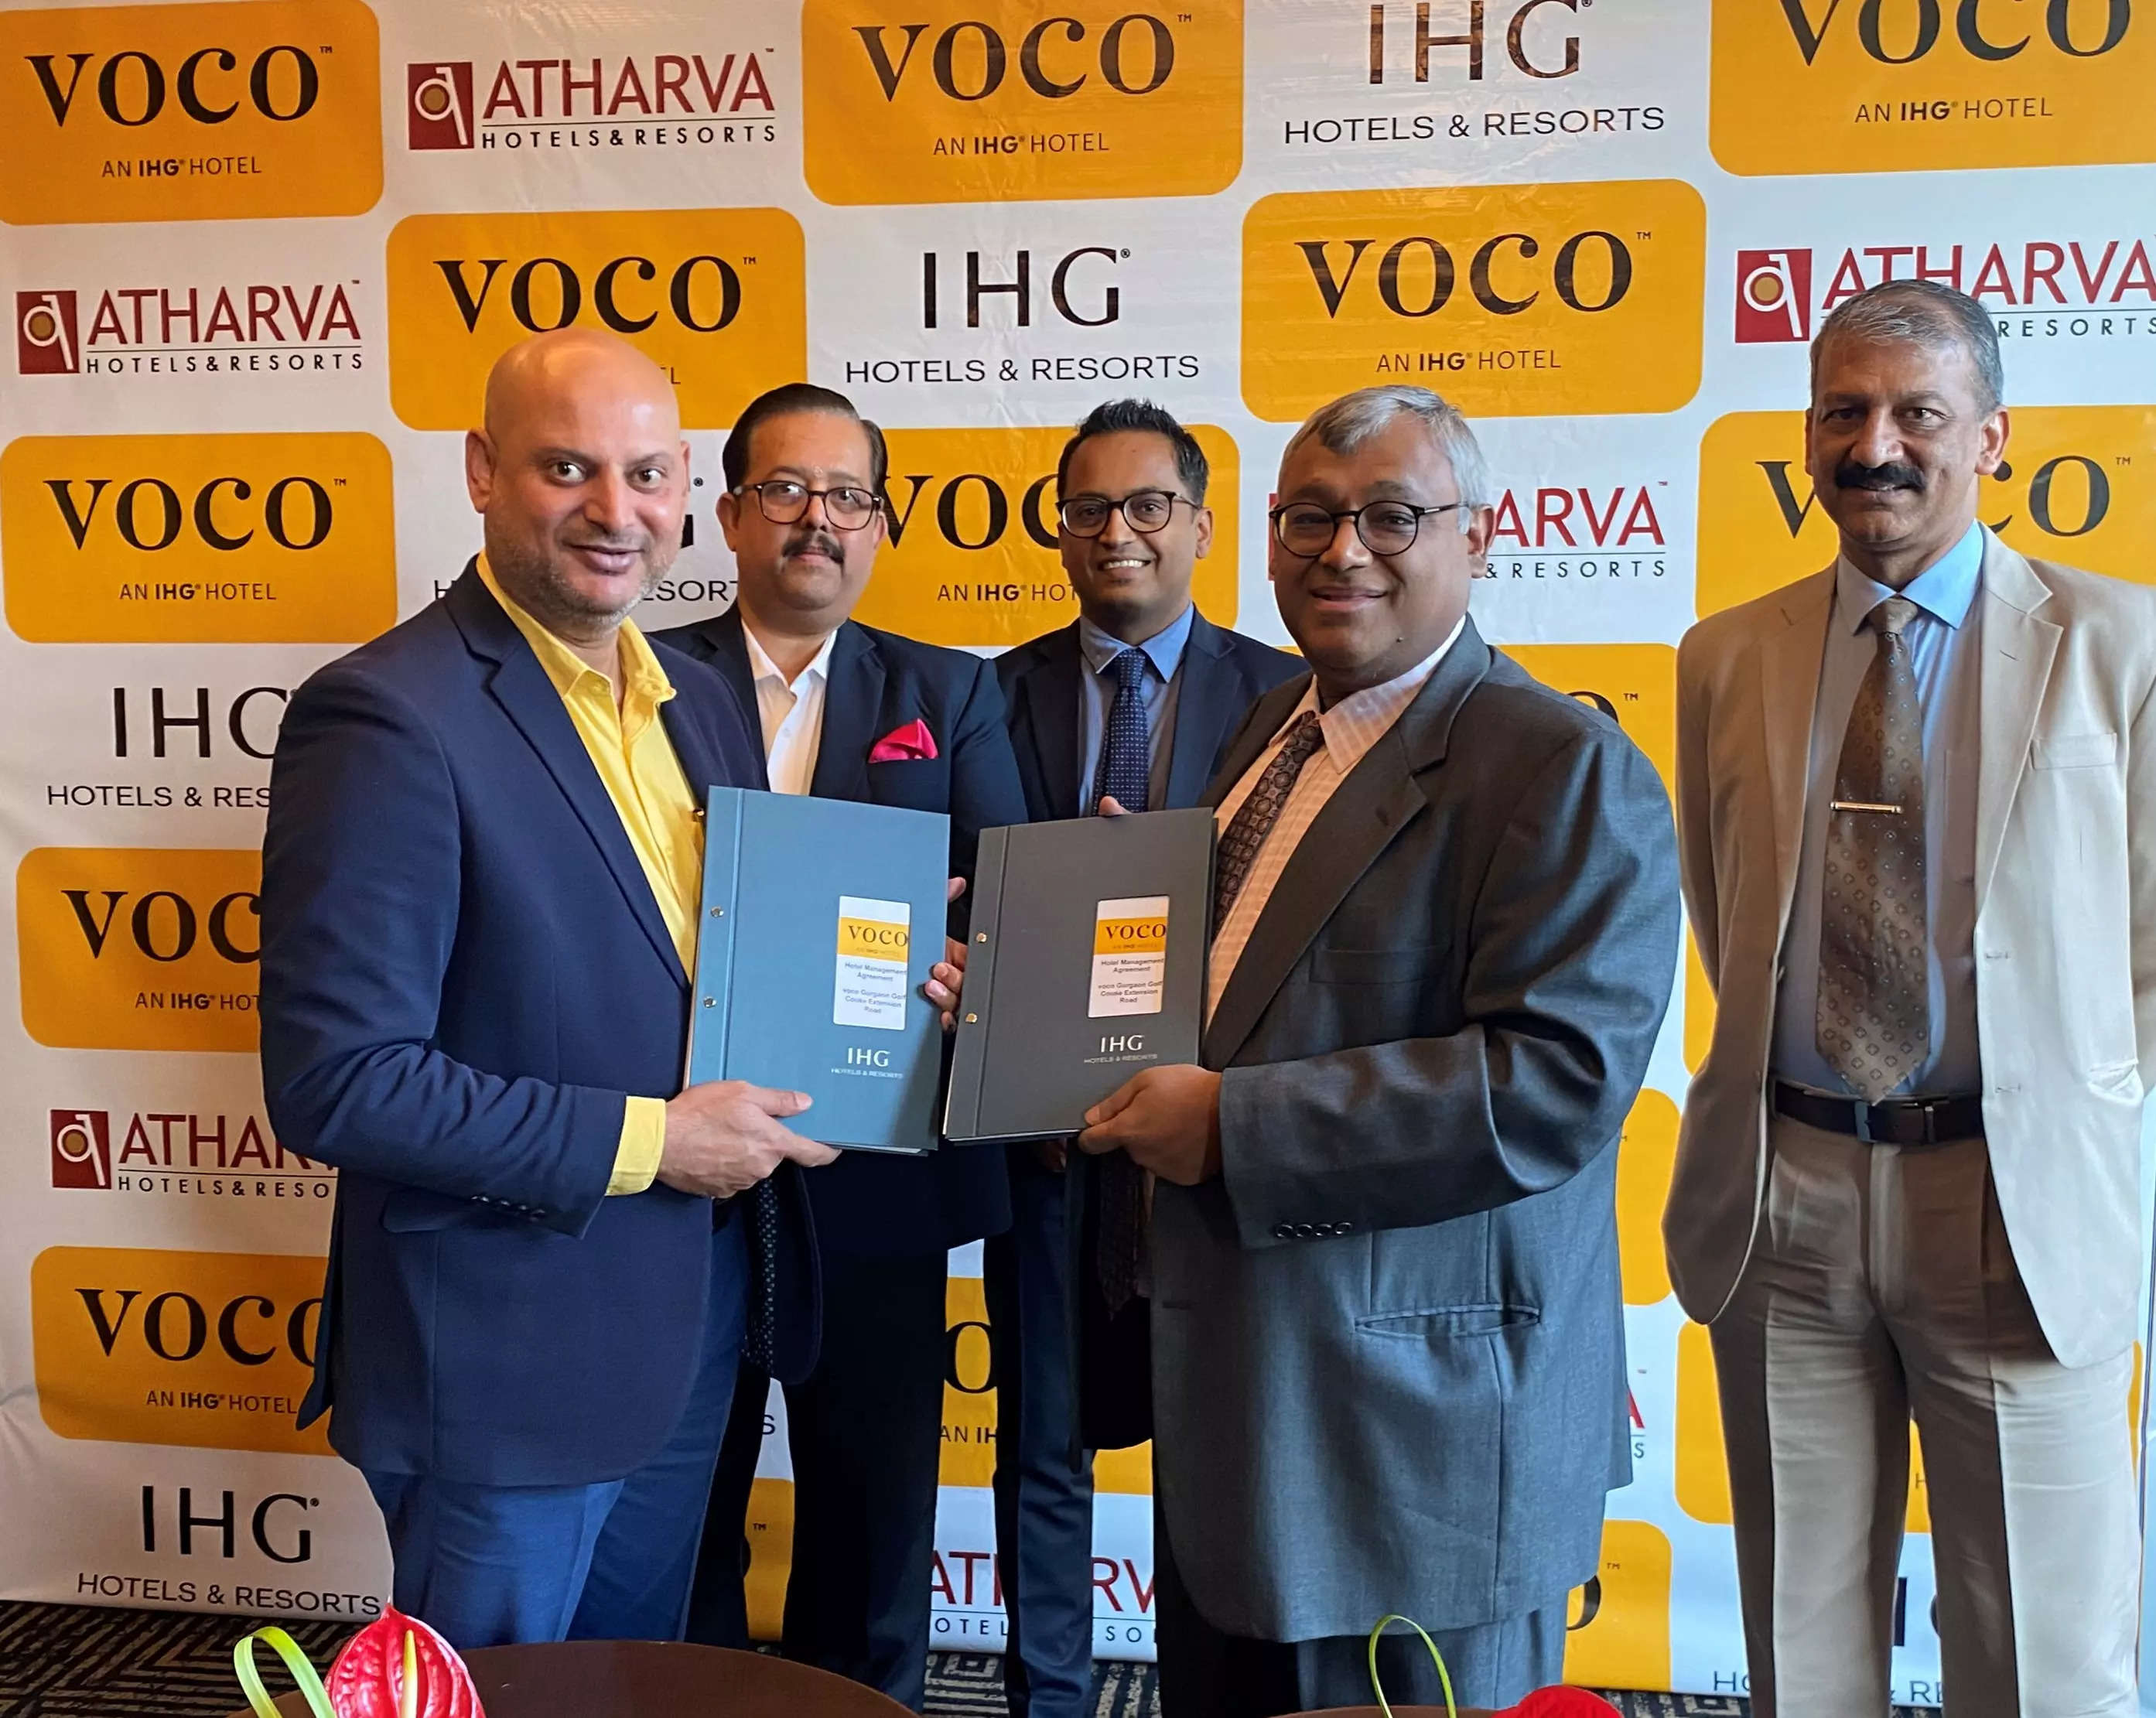     MoU signing between Prawal Choudhary, chairman, Atharva Hotels & Resorts (left) and Sudeep Jain, MD-South West Asia, IHG Hotels and Resorts for a 206-room VOCO in Gurugram.  Also in the frame are Deepak Jha, MD, Atharva Hotels & Resorts;  Nishant Kumar, director - Development, IHG Hotels & Resorts and Ranjit Mundle, CEO, Atharva Hotels & Resorts.